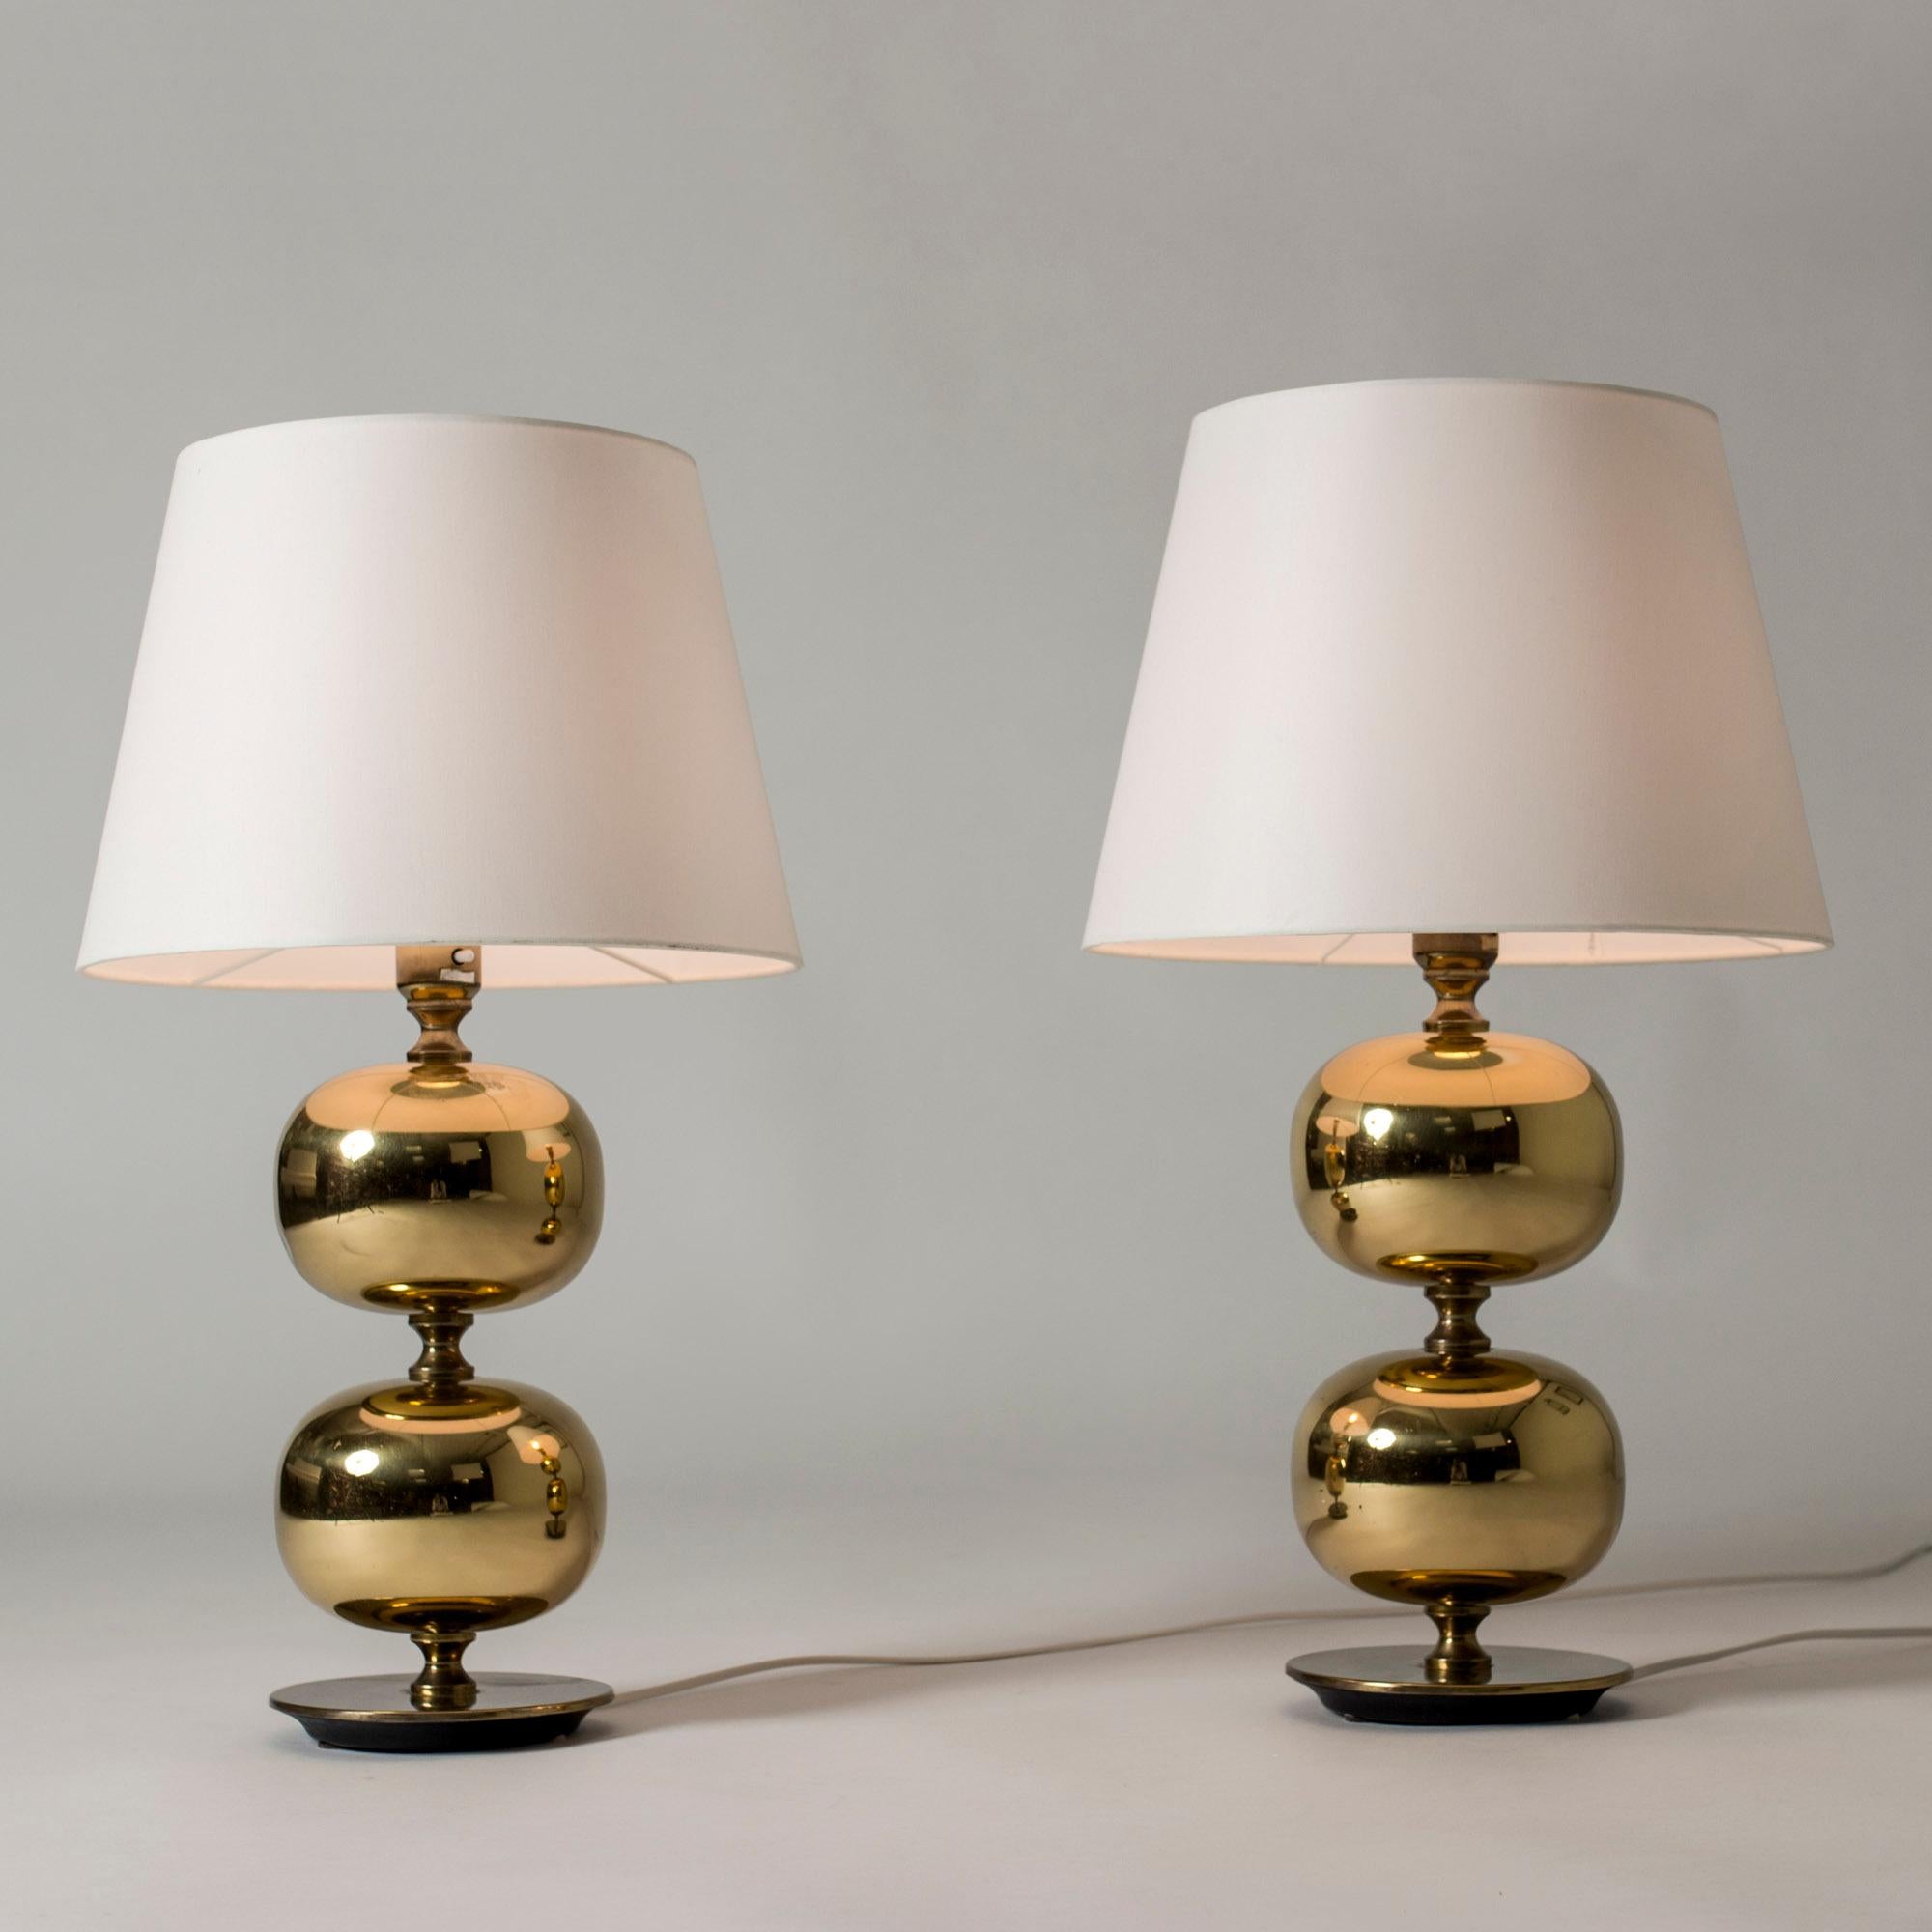 Mid-20th Century Pair of Midcentury Brass Table Lamps by Henrik Blomqvist, Sweden, 1960s For Sale